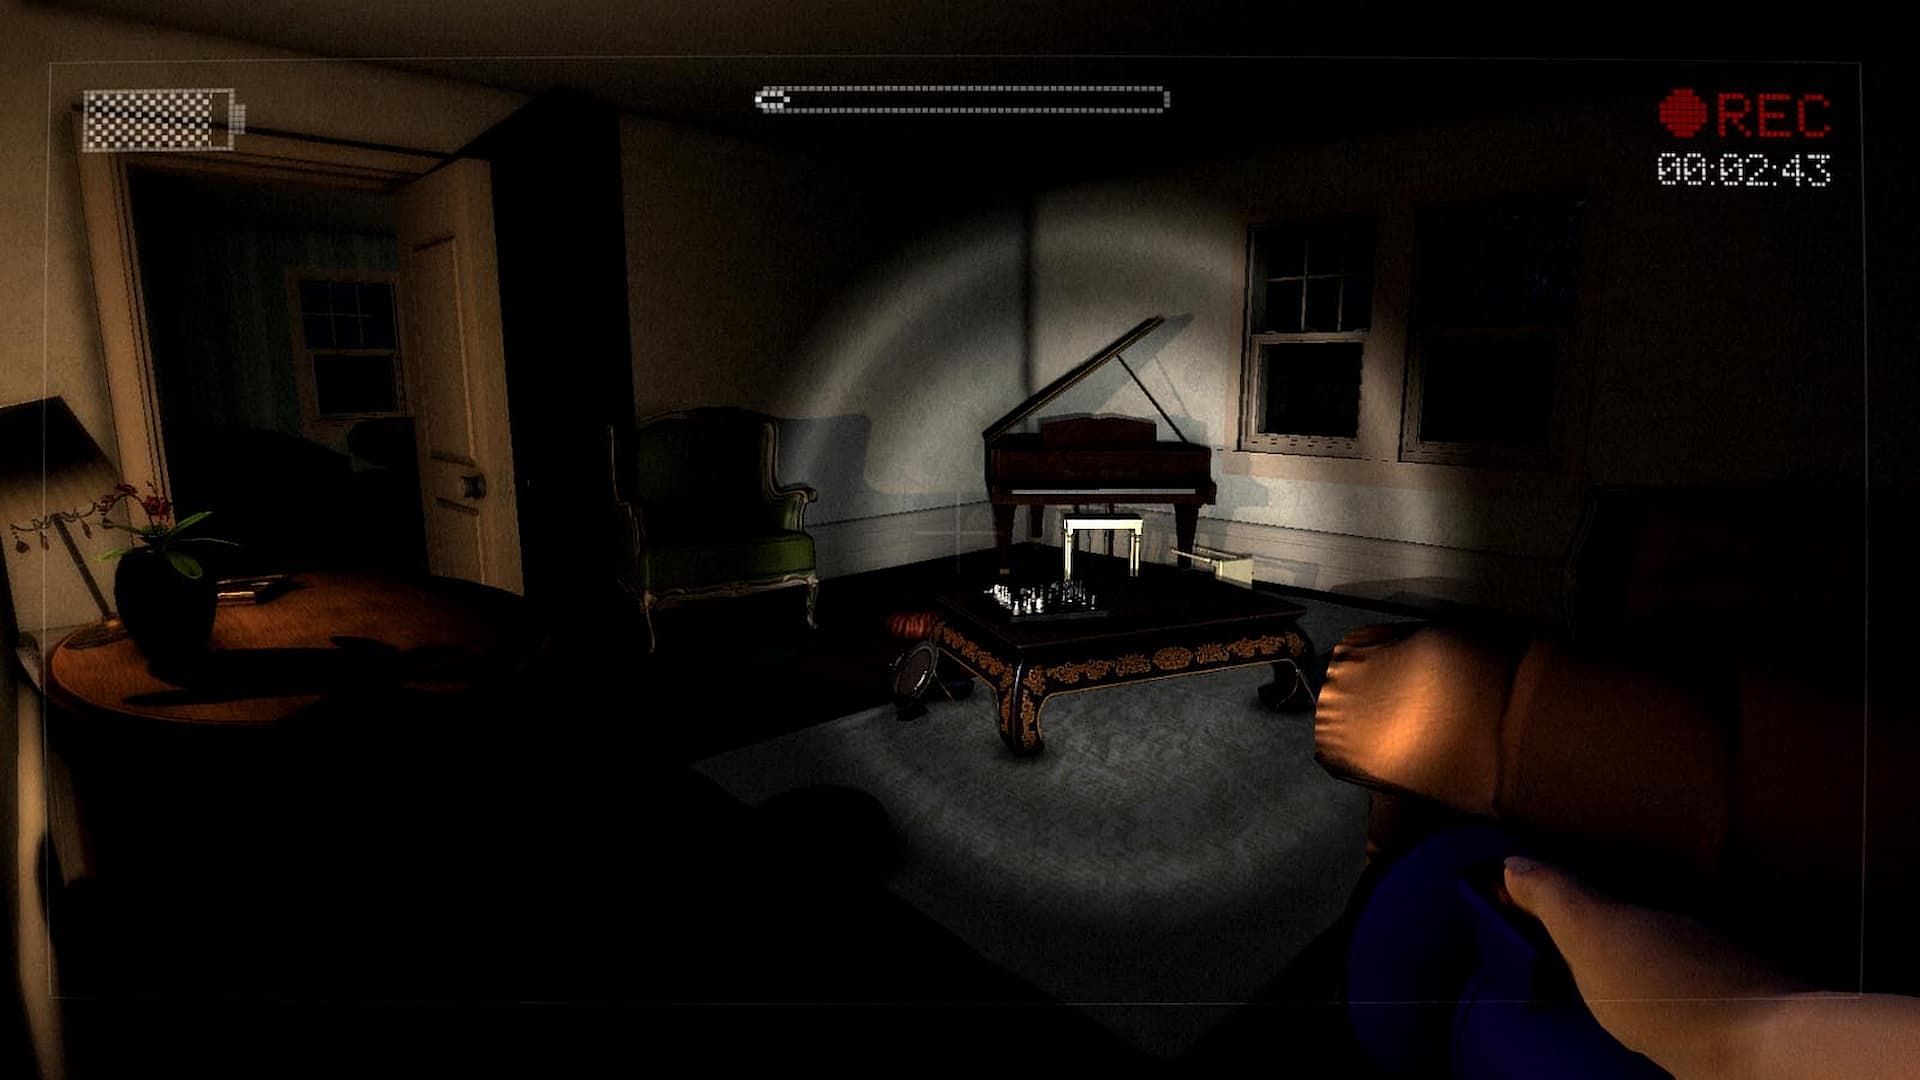 Slender: The Arrival boasts some great jumpscares in the gameplay (Image via Blue Isle Studios)